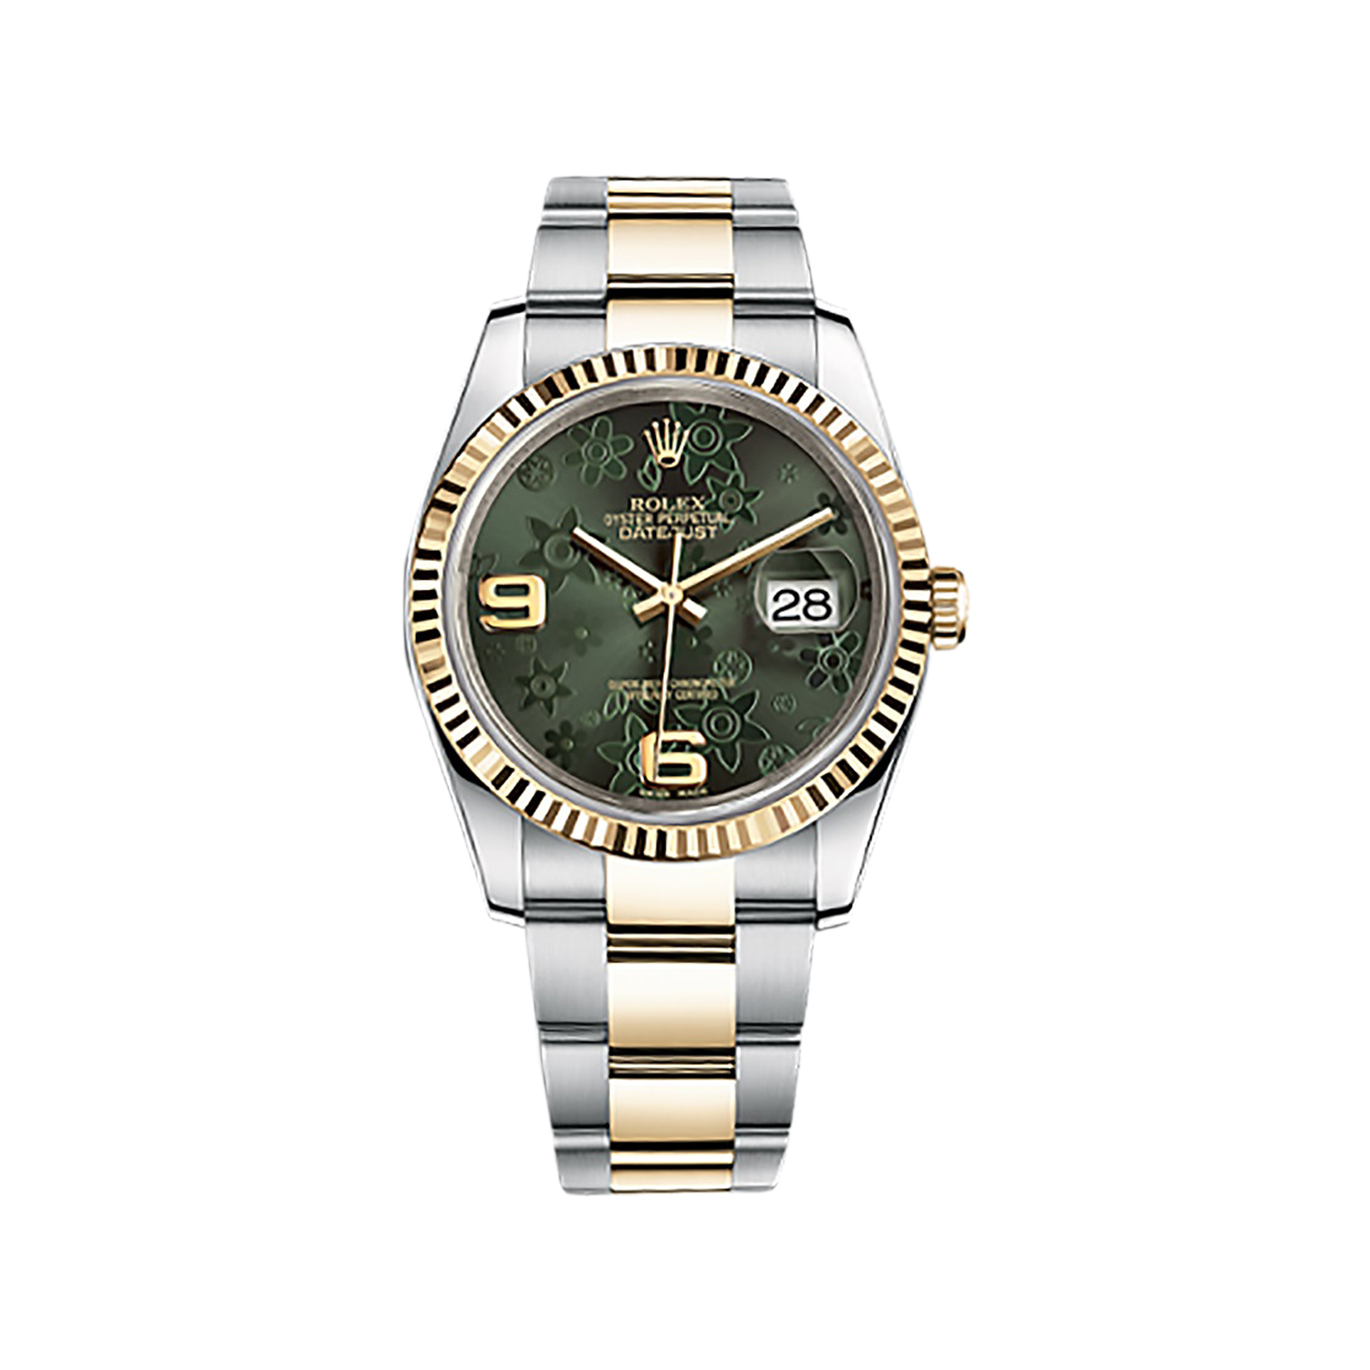 Datejust 36 116233 Gold & Stainless Steel Watch (Green Floral Motif)